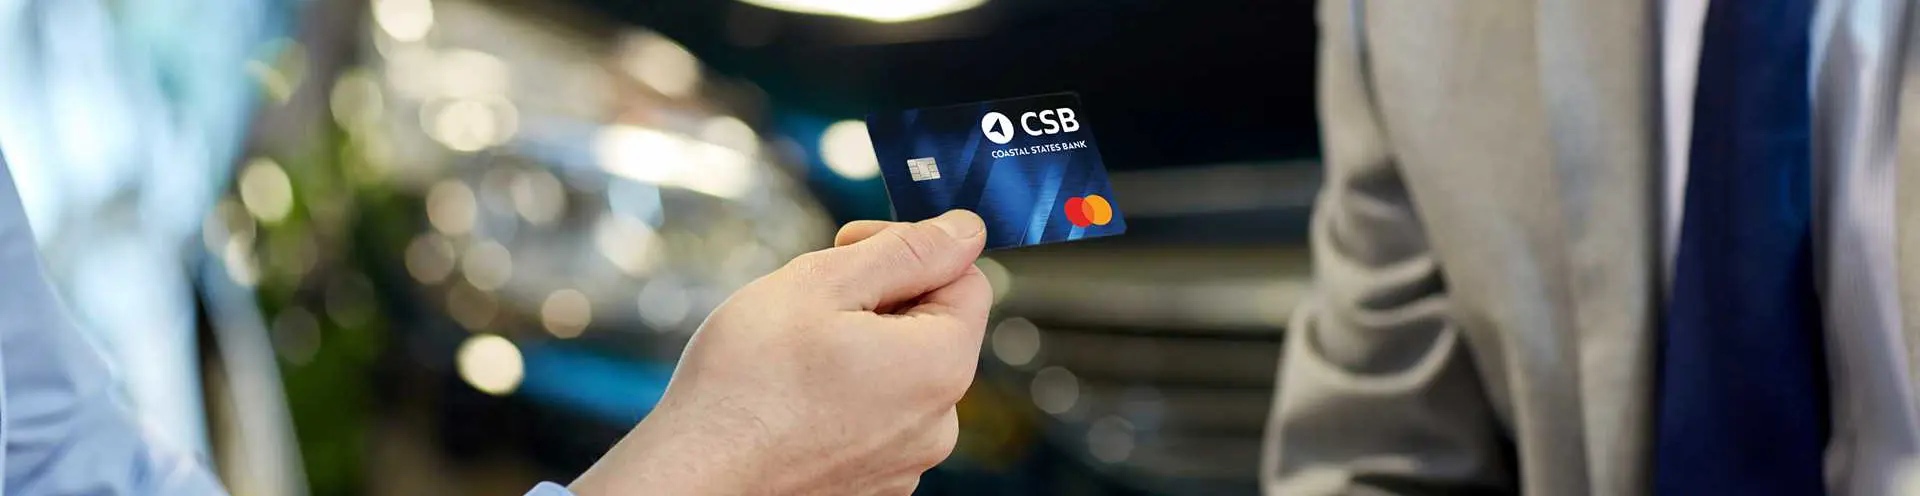 Business Credit Card - Person Paying with CSB Credit Card at Establishment 